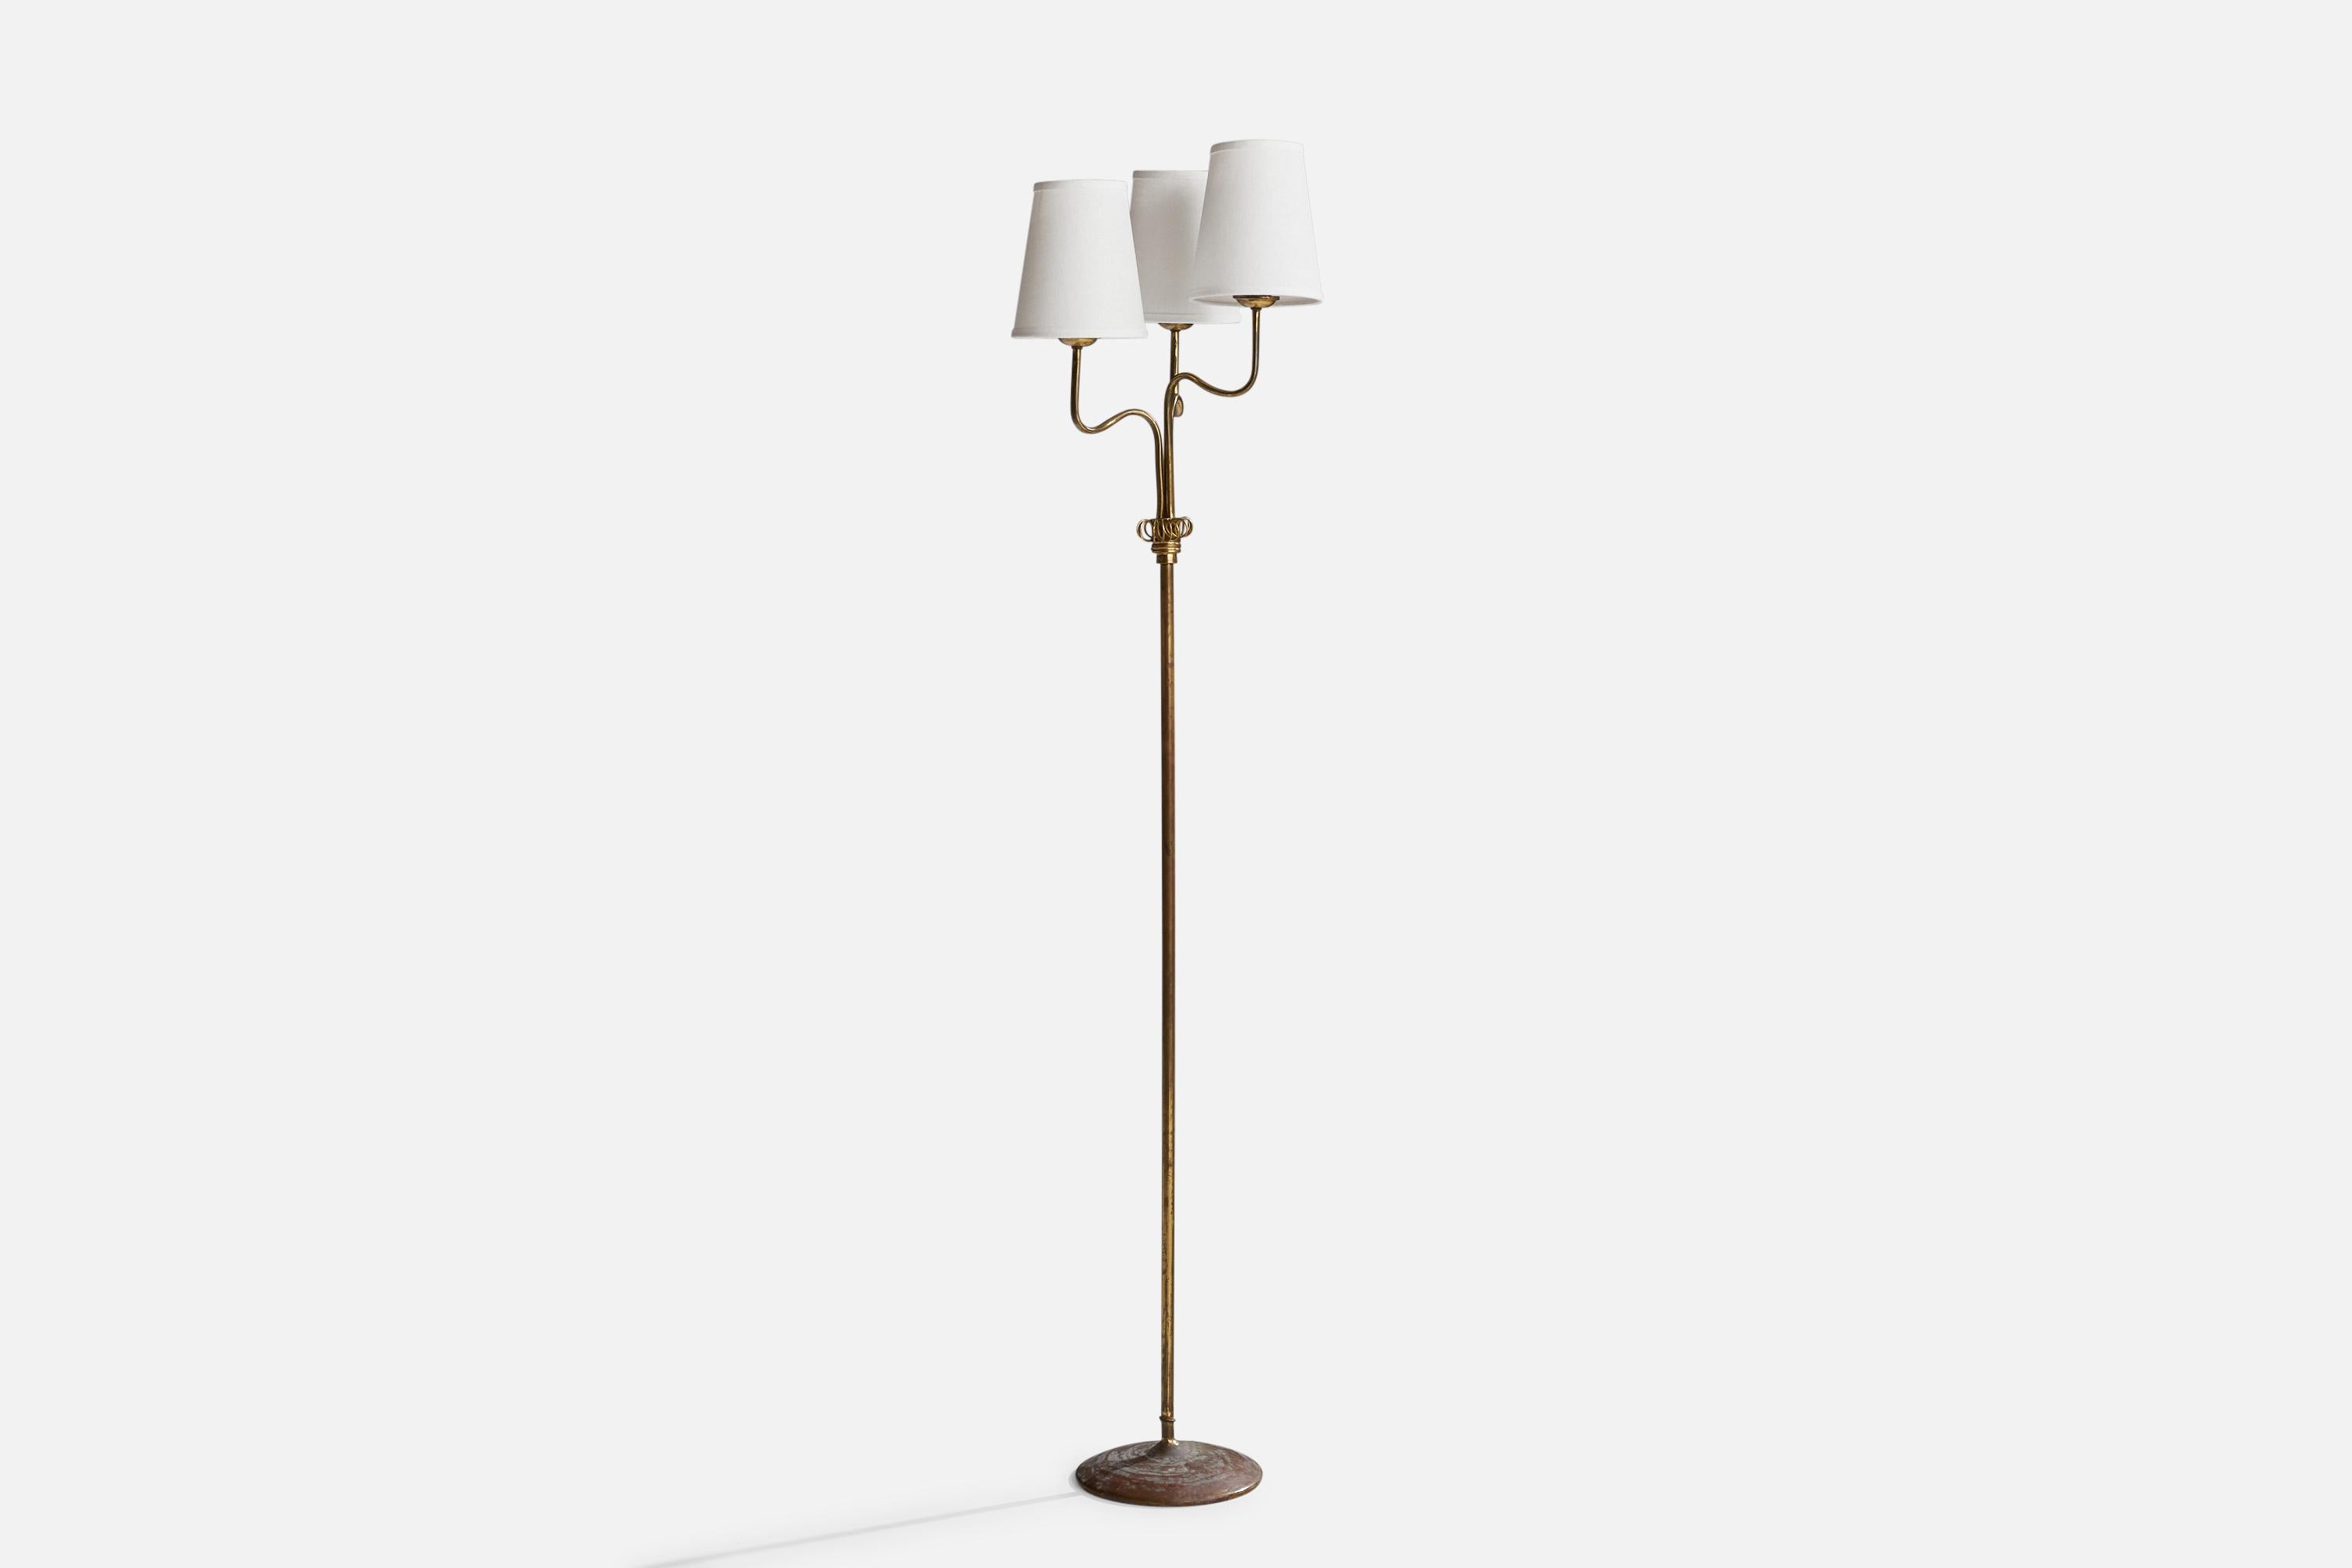 A brass and white fabric floor lamp designed and produced in Finland, c. 1940s.

Dimensions of Lamp (inches): 58” H x 9” Diameter
Dimensions of Shade (inches): 4”  Top Diameter x 6” Bottom Diameter x 7” H
Dimensions of Lamp with Shade (inches): 62.5